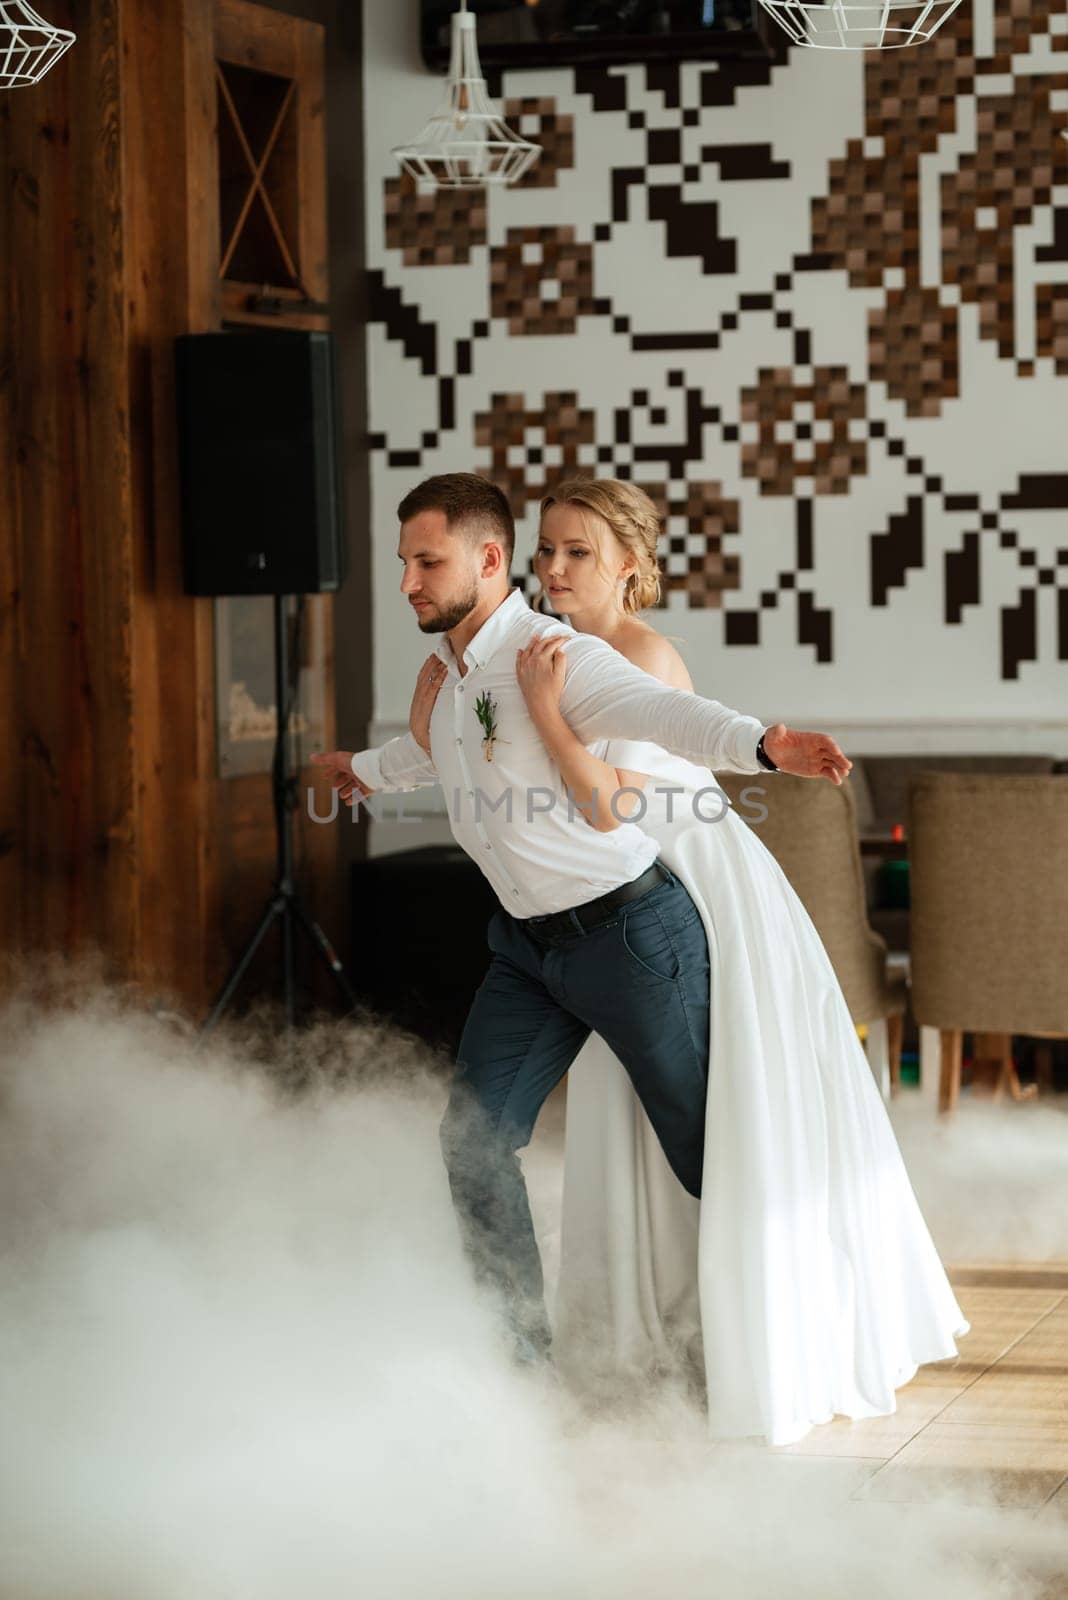 the first dance of the bride and groom inside a restaurant with heavy smoke